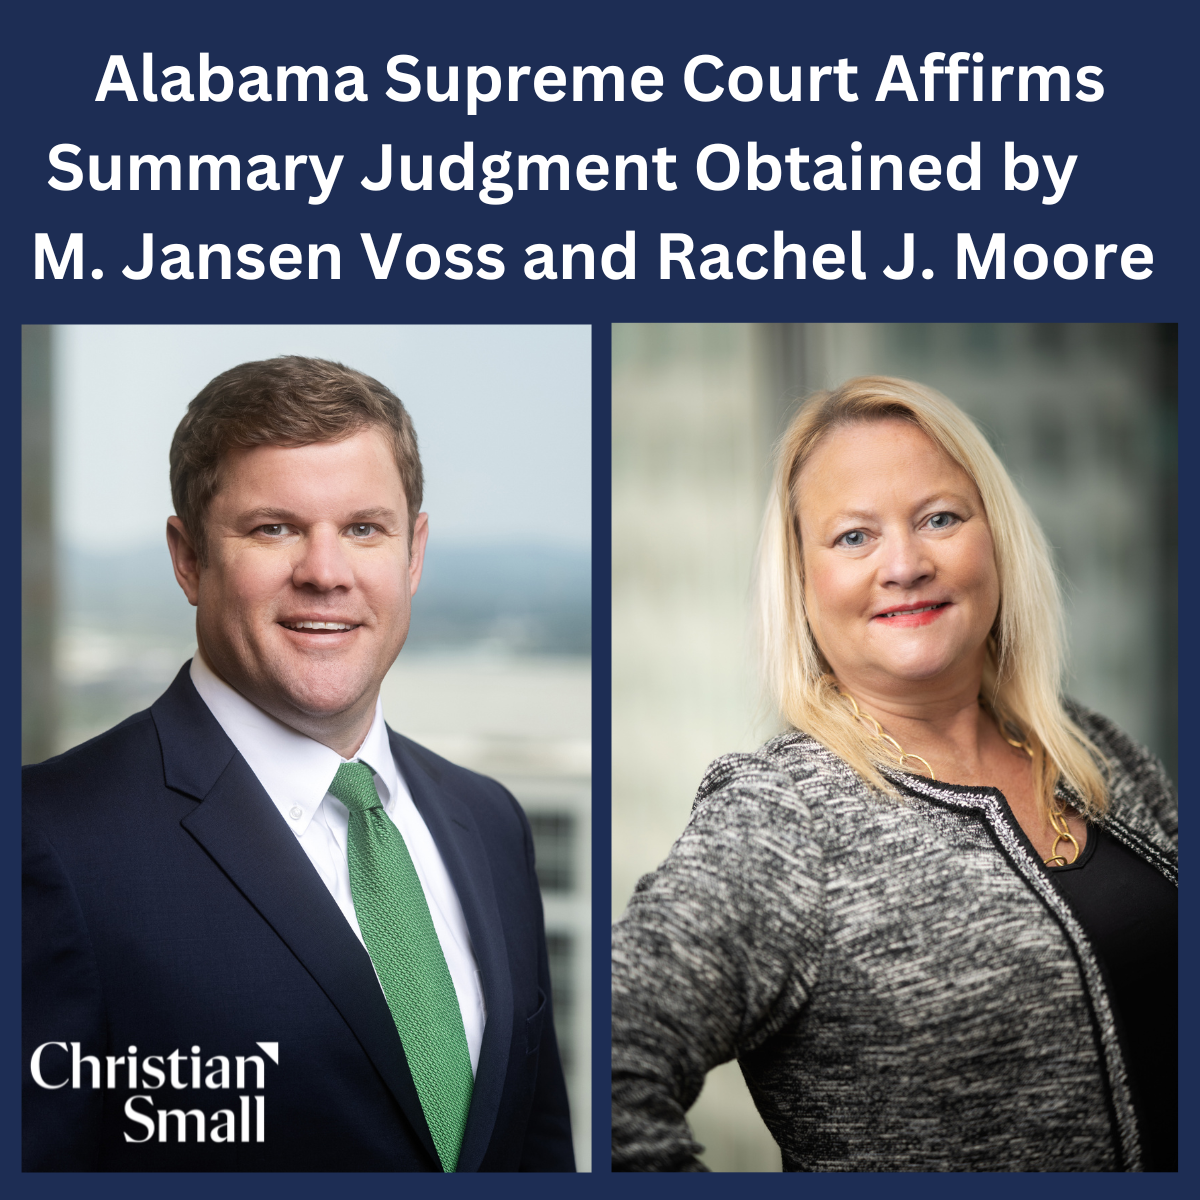 Alabama Supreme Court Affirms Summary Judgment Obtained by M. Jansen Voss and Rachel J. Moore